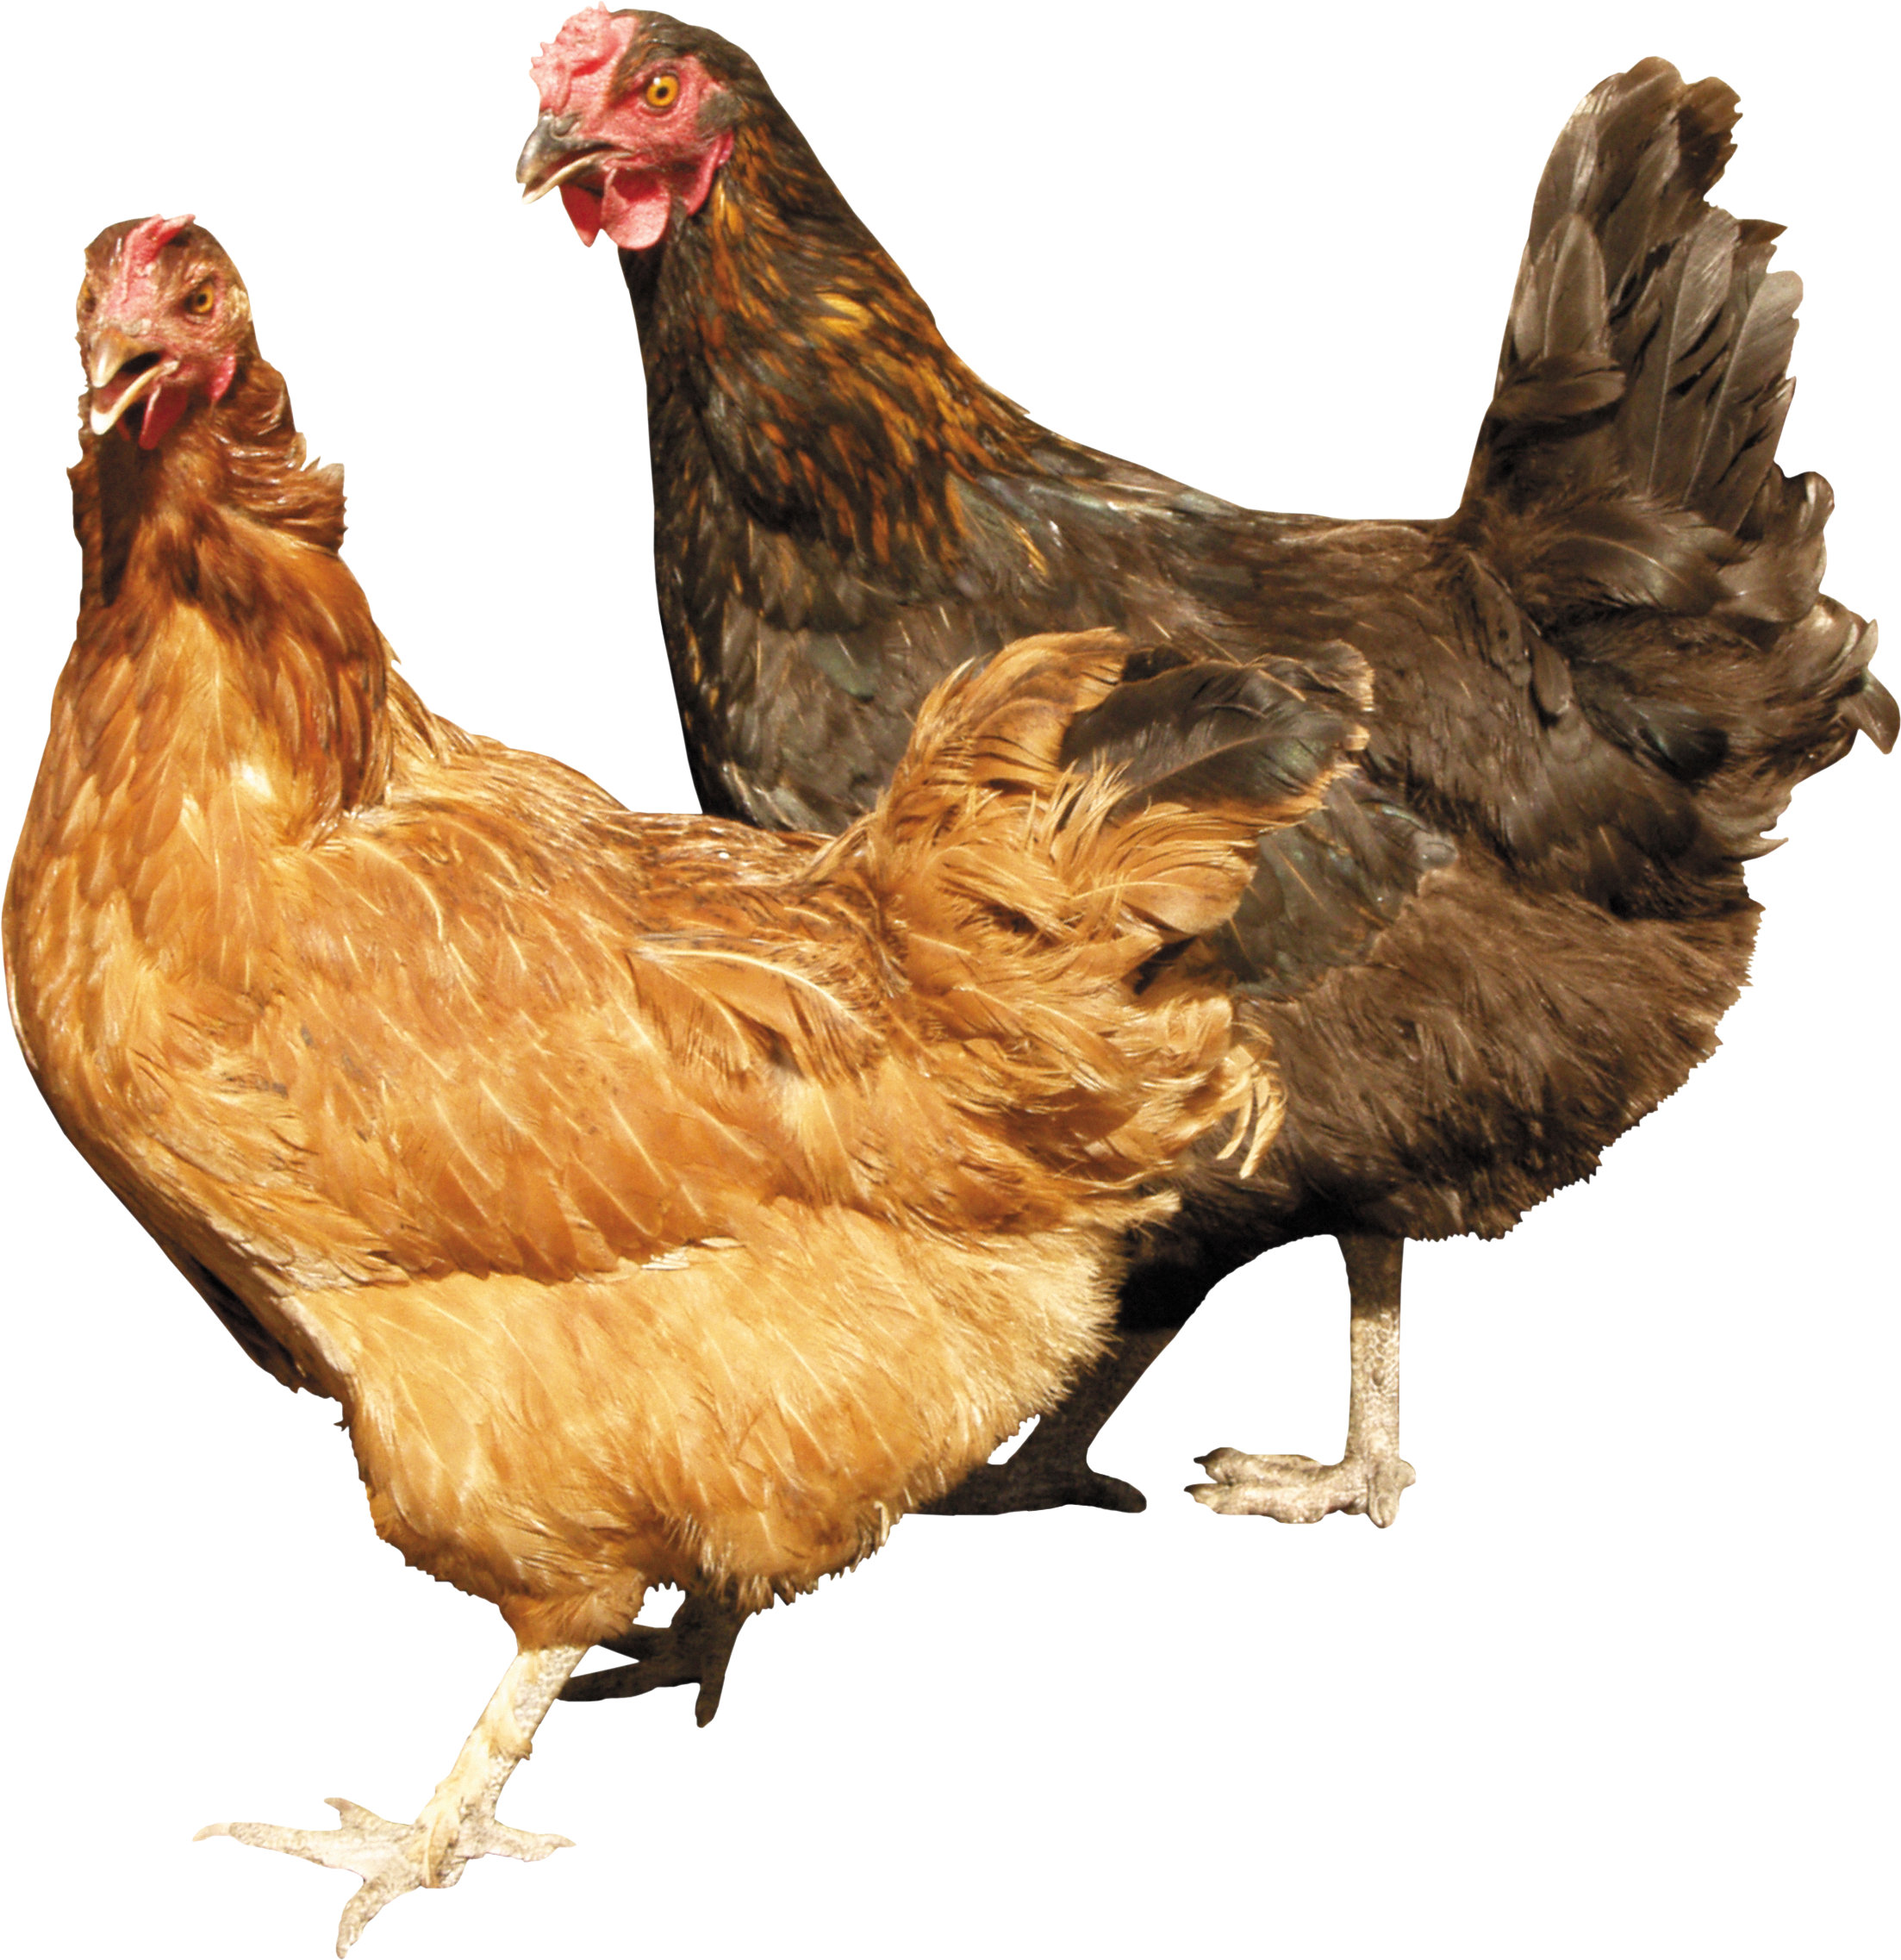 PNG HD Of Chickens - 148739